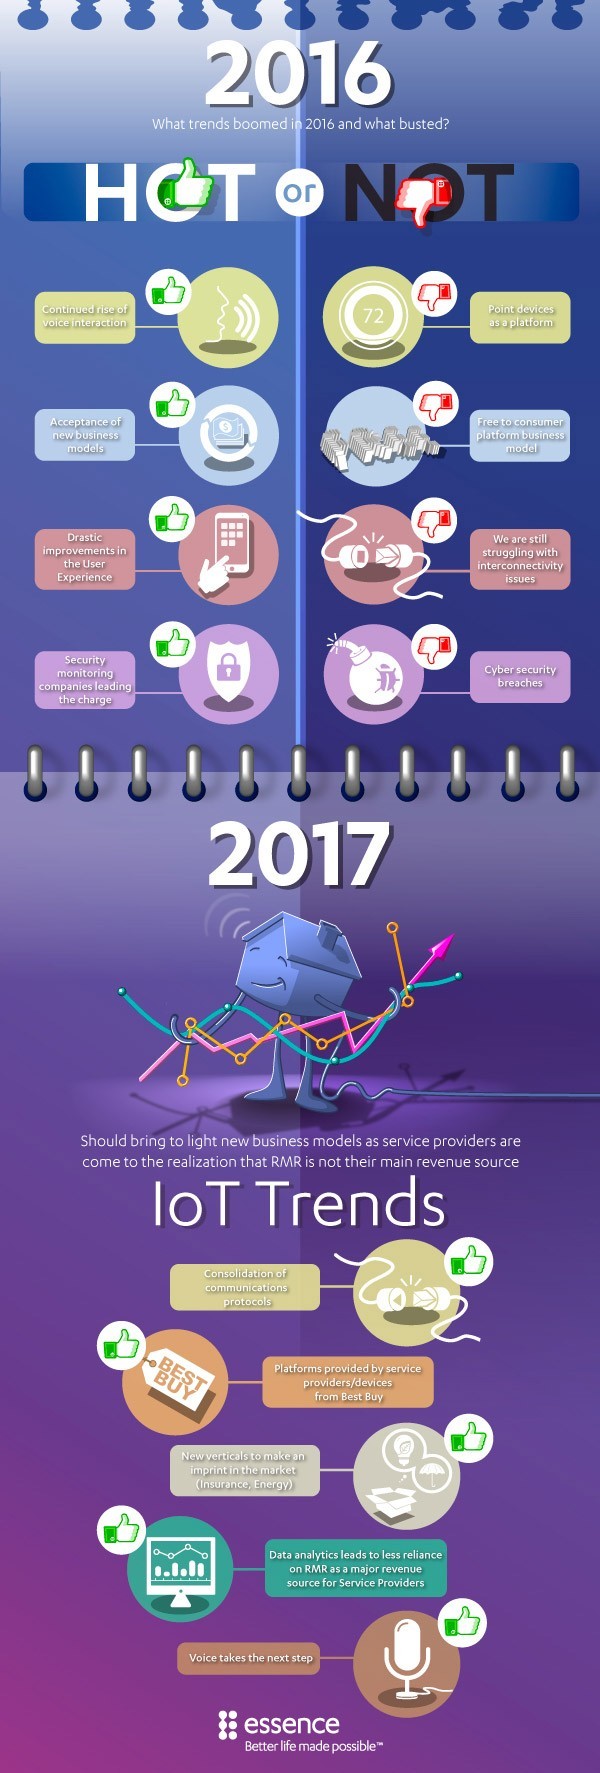 Essence infographic: 2017 predictions for IoT